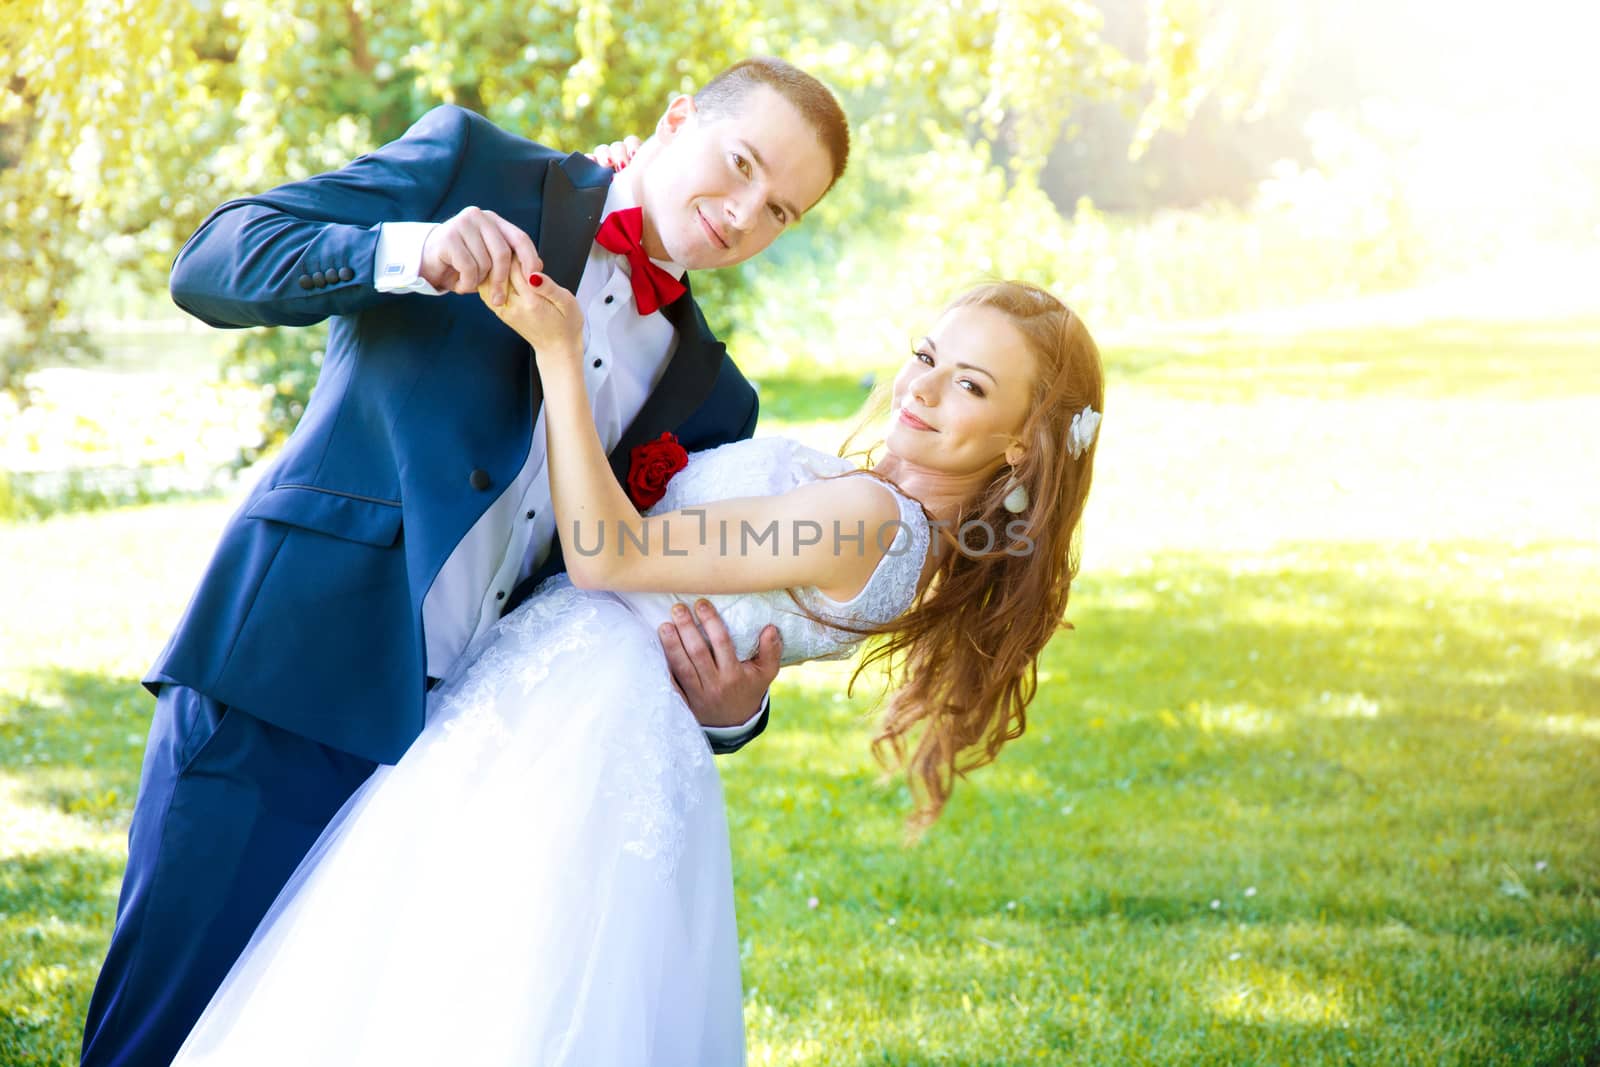 Wedding Couple dance in green park at summer. Marriage and wedding concept image.